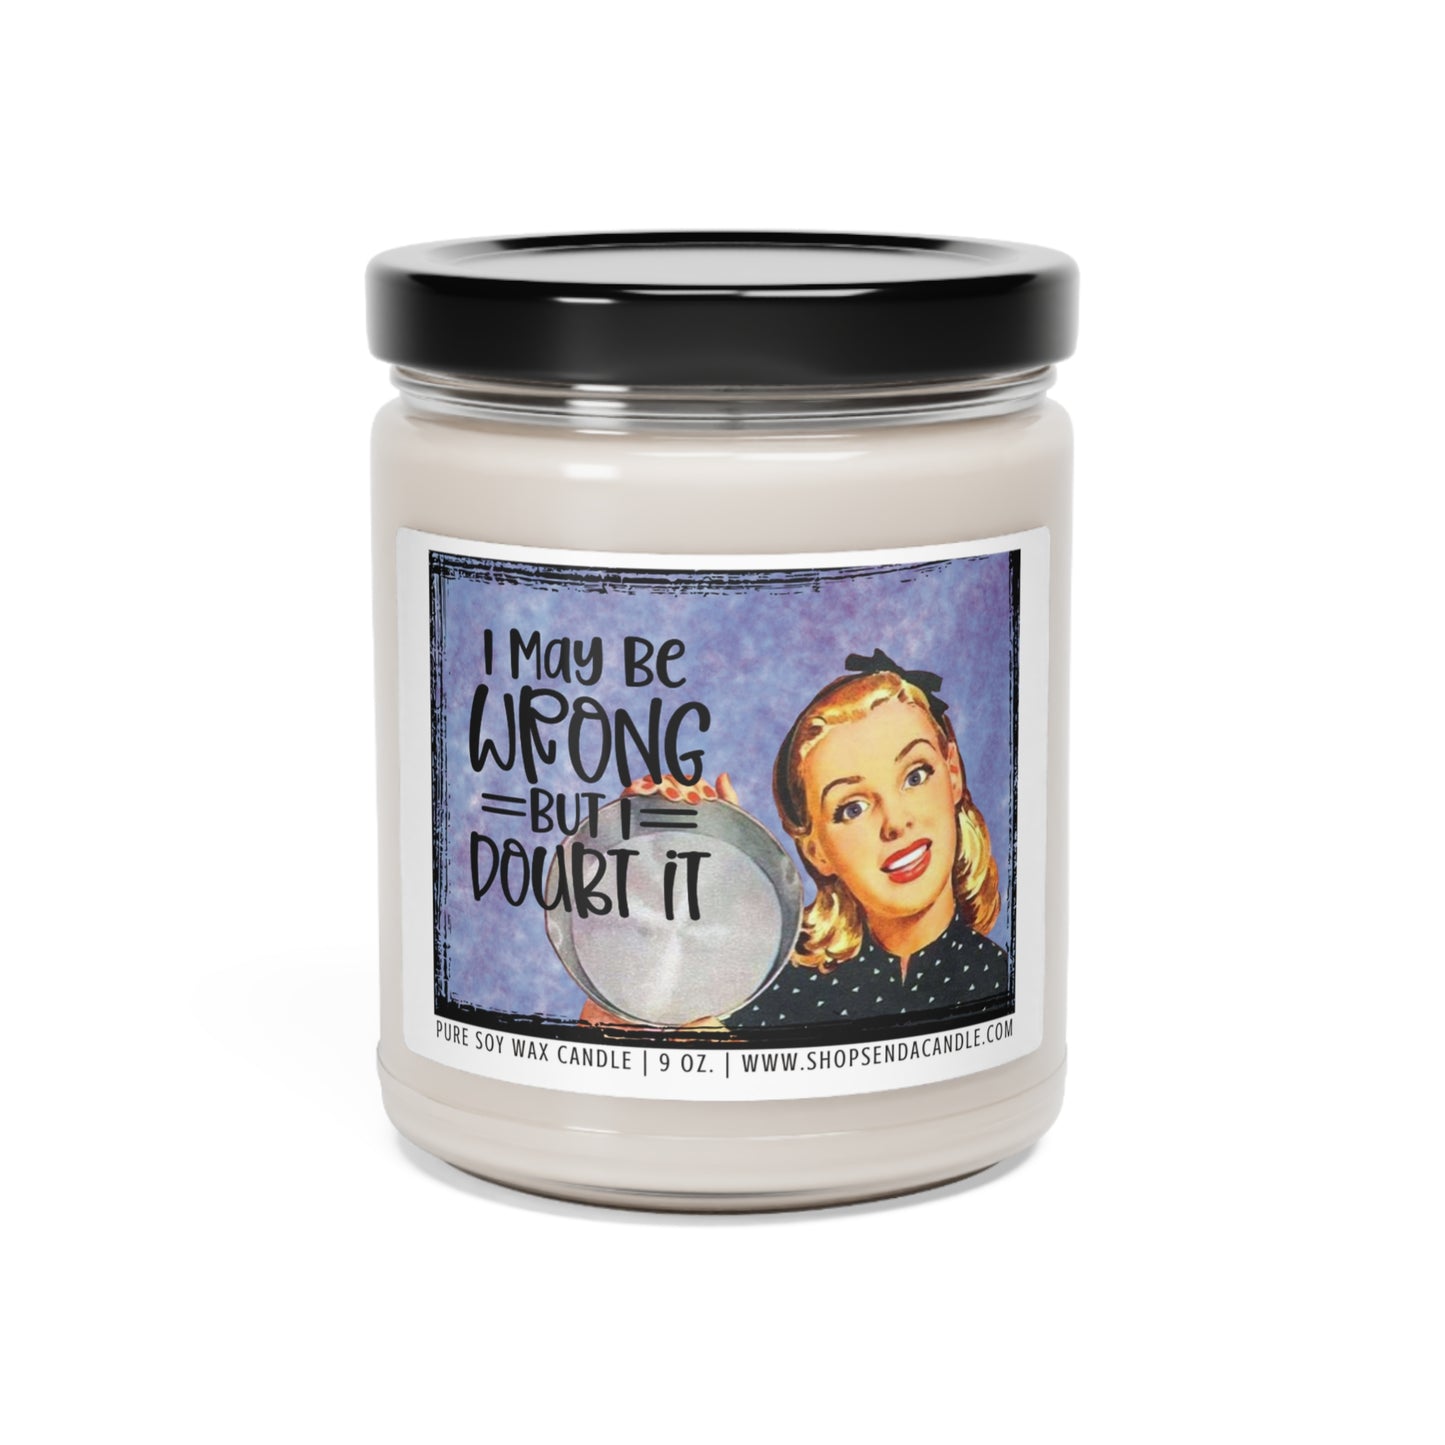 Funny Candles For Coworkers | Send A Candle